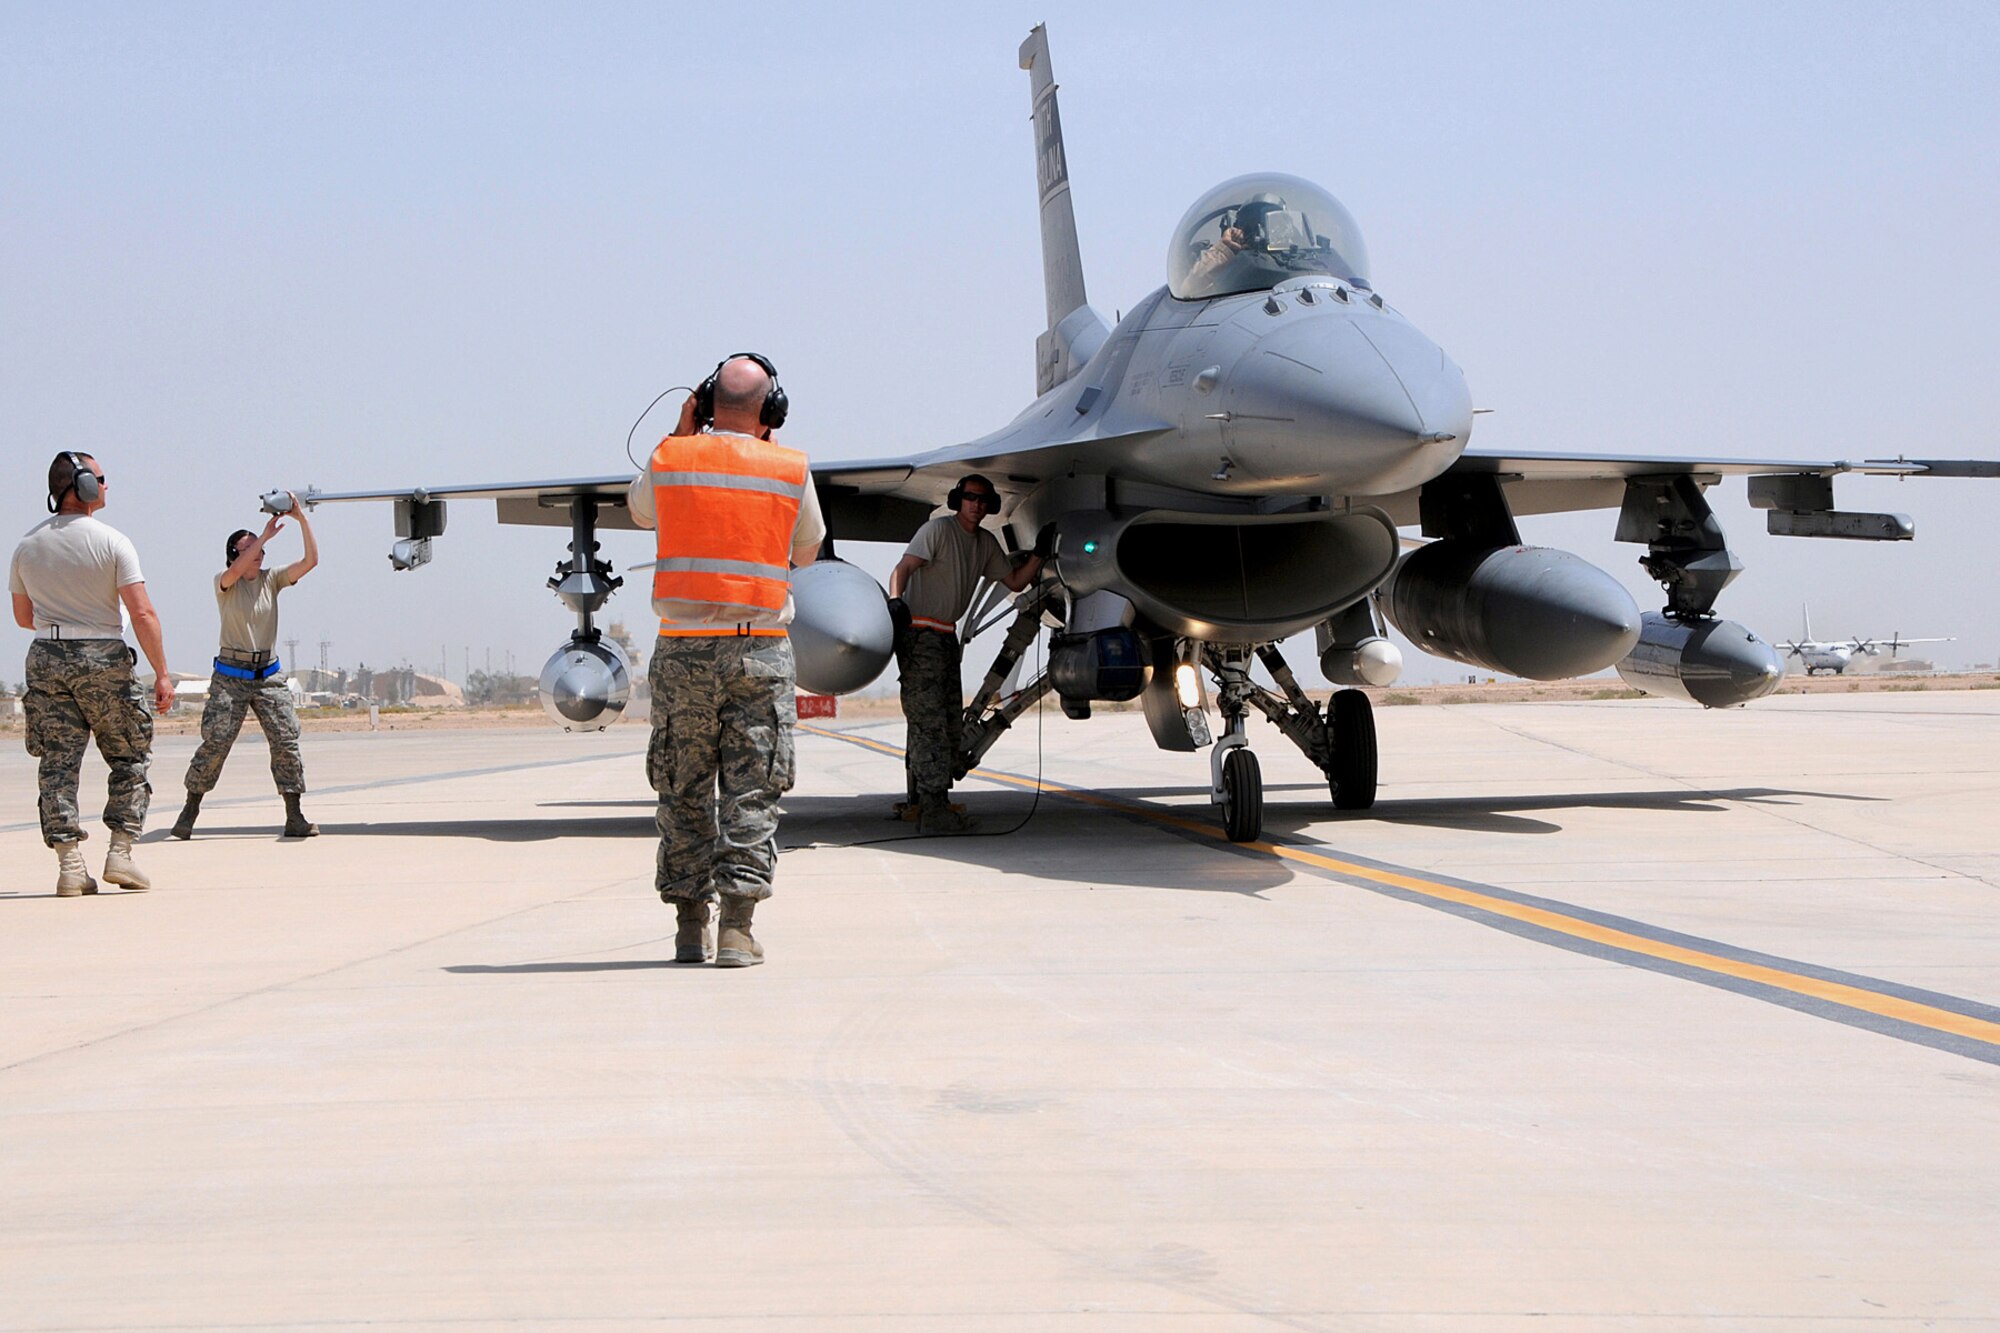 U.S. Air Force Tech. Sgt. Michael Bilberry, a crew chief with the 169th Aircraft Maintenance Squadron at McEntire Joint National Guard Base, South Carolina Air National Guard, marshals an F-16 Fighting Falcon from the 157th Fighter Squadron, that landed at Joint Base Balad (JBB), Iraq, May 16, 2010.  Staff Sgt. Kenneth Monroe (left), Airman 1st Class Lyla Rayer and Staff Sgt. Leonard Gajewsky (center) with the 169th Aircraft Maintenance Squadron, work to quickly de-arm the aircraft.  Personnel from McEntire are deployed to JBB on an Air Expeditionary Force rotation to take over the Air Tasking Order for the 332nd Air Expeditionary Wing.
(U.S. Air National Guard photo by Tech. Sgt. Caycee Watson/Released)
